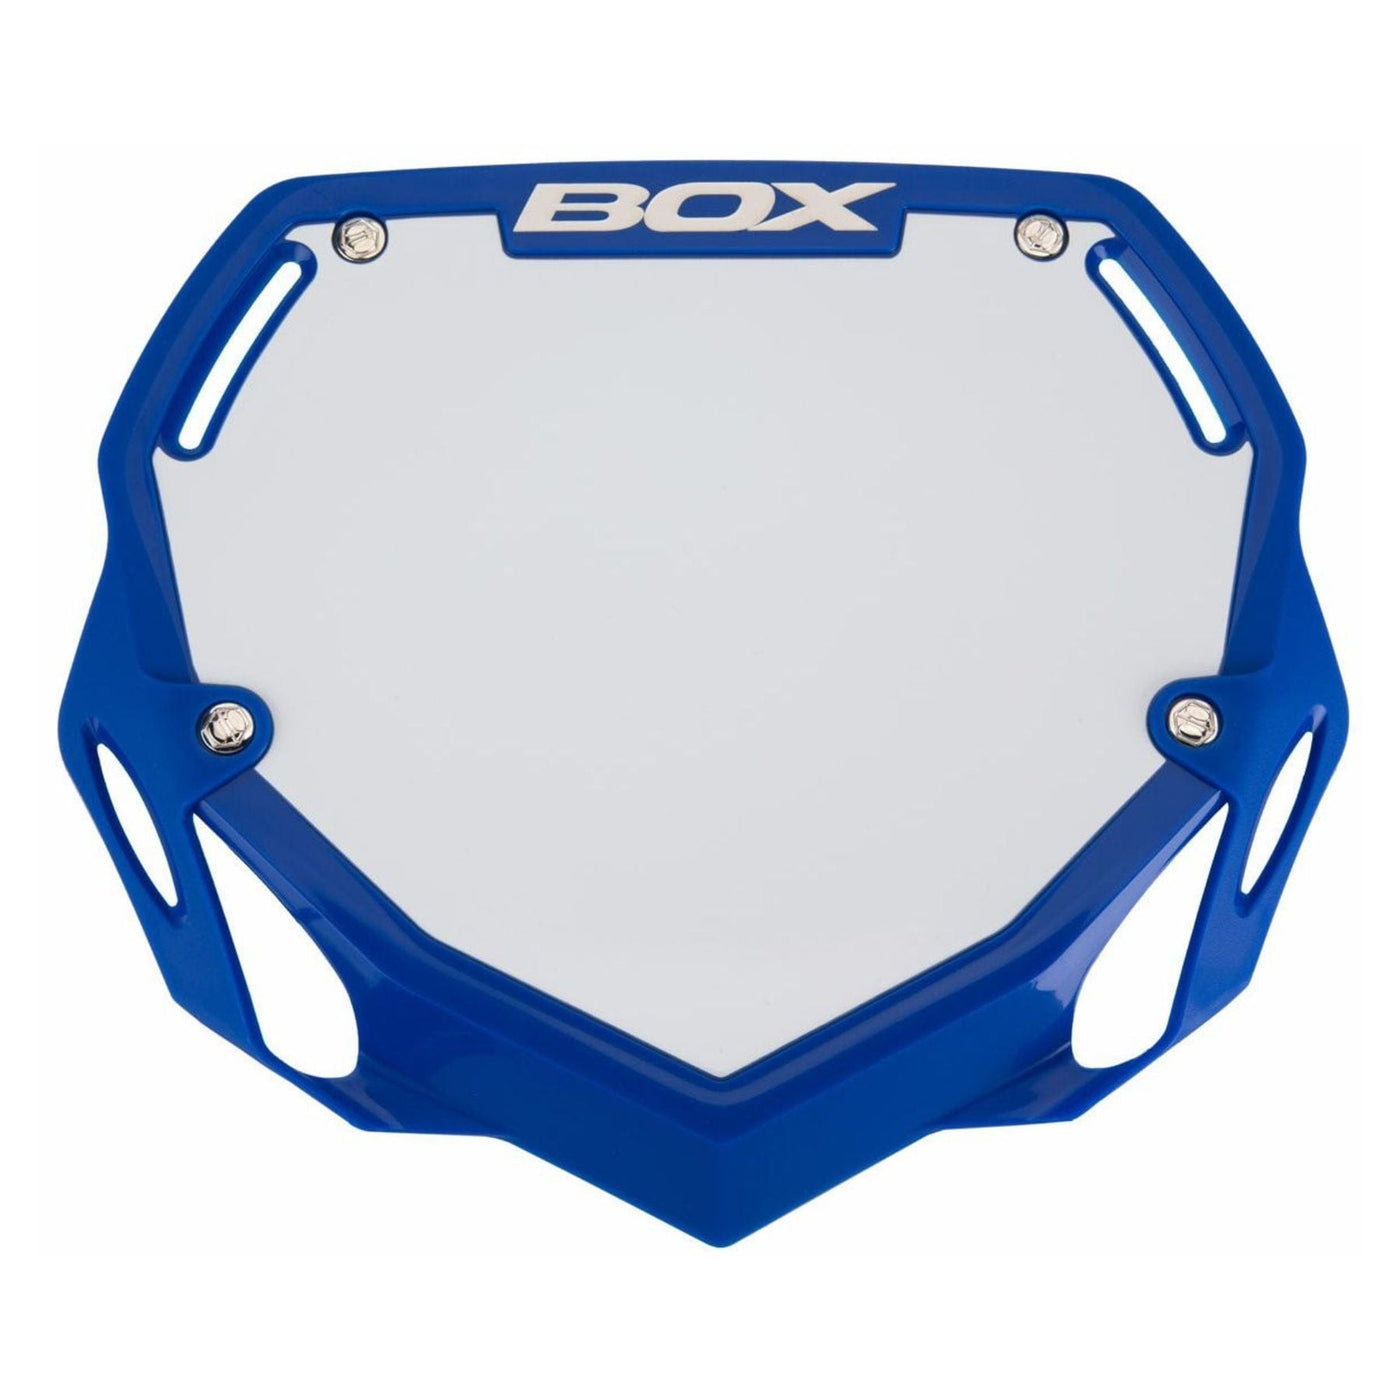 Box One BMX Racing Number Plate - Blue - Large